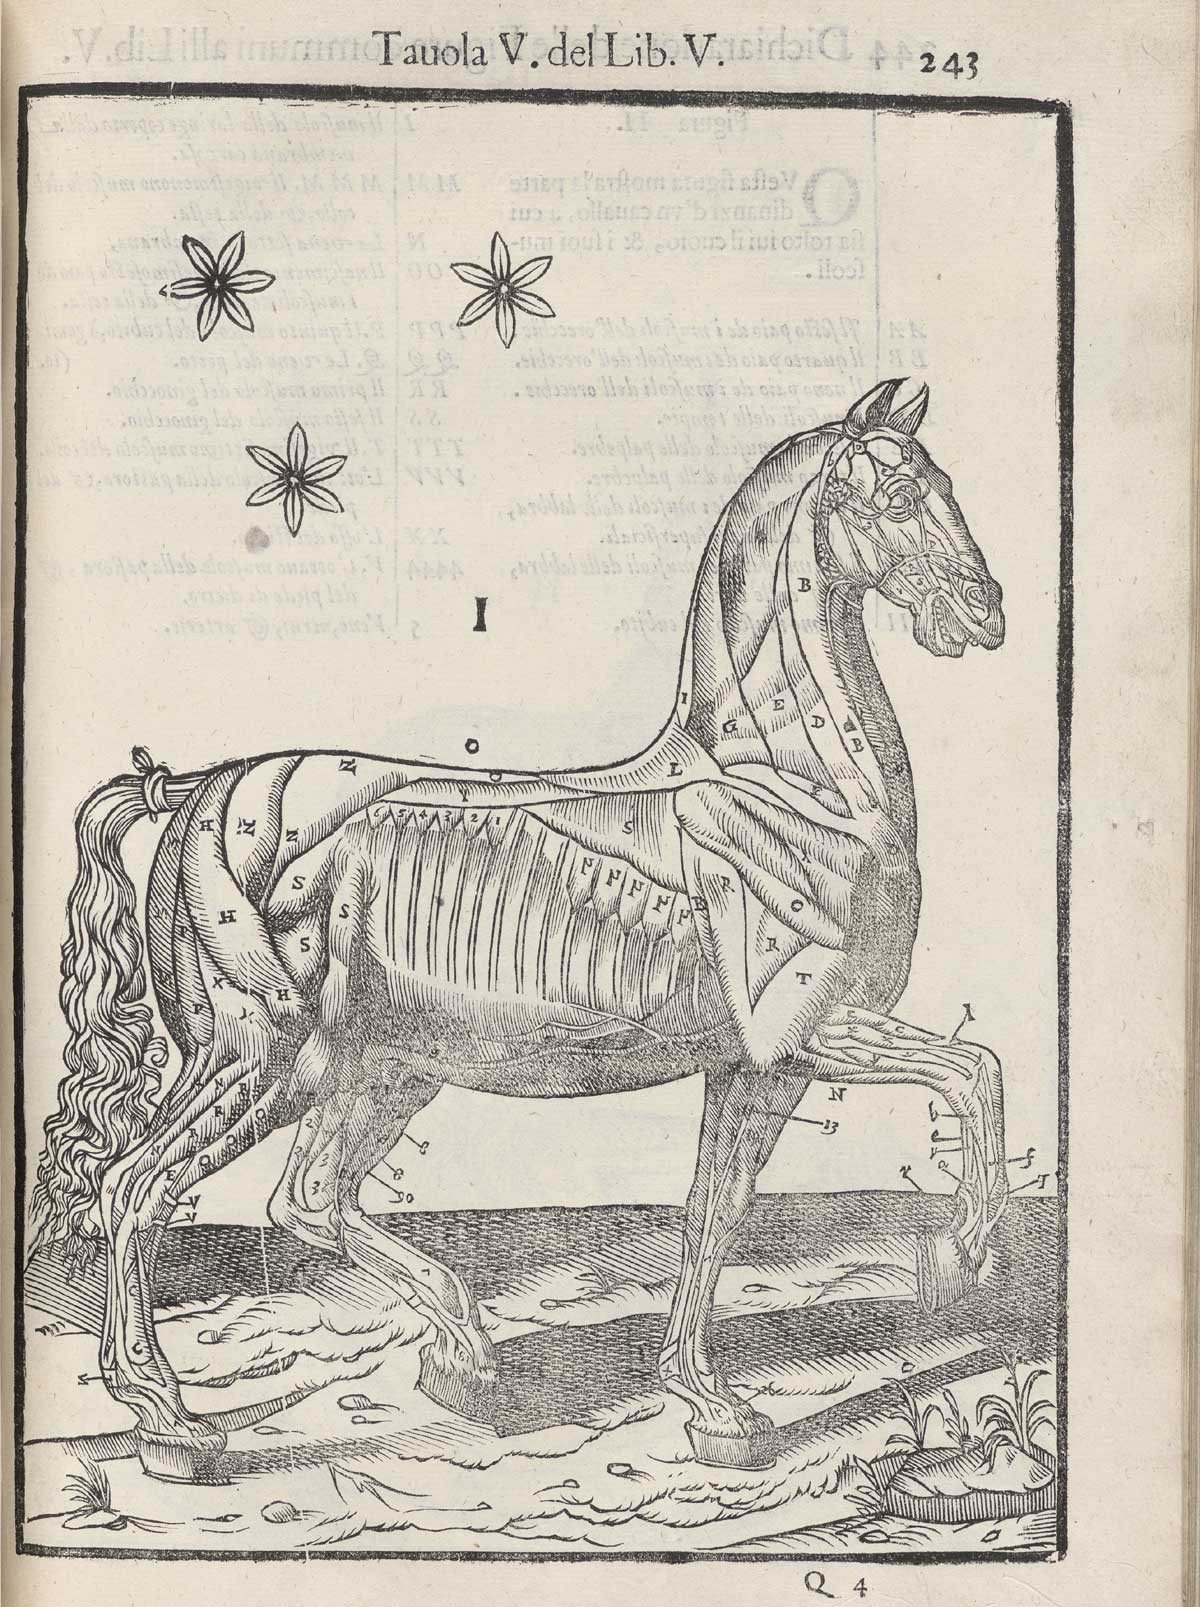 Page 243 of Ruini's Anatomia del cavallo, infermità, et suoi rimedii, featuring the full length right side view of a flayed horse detailing the muscles.